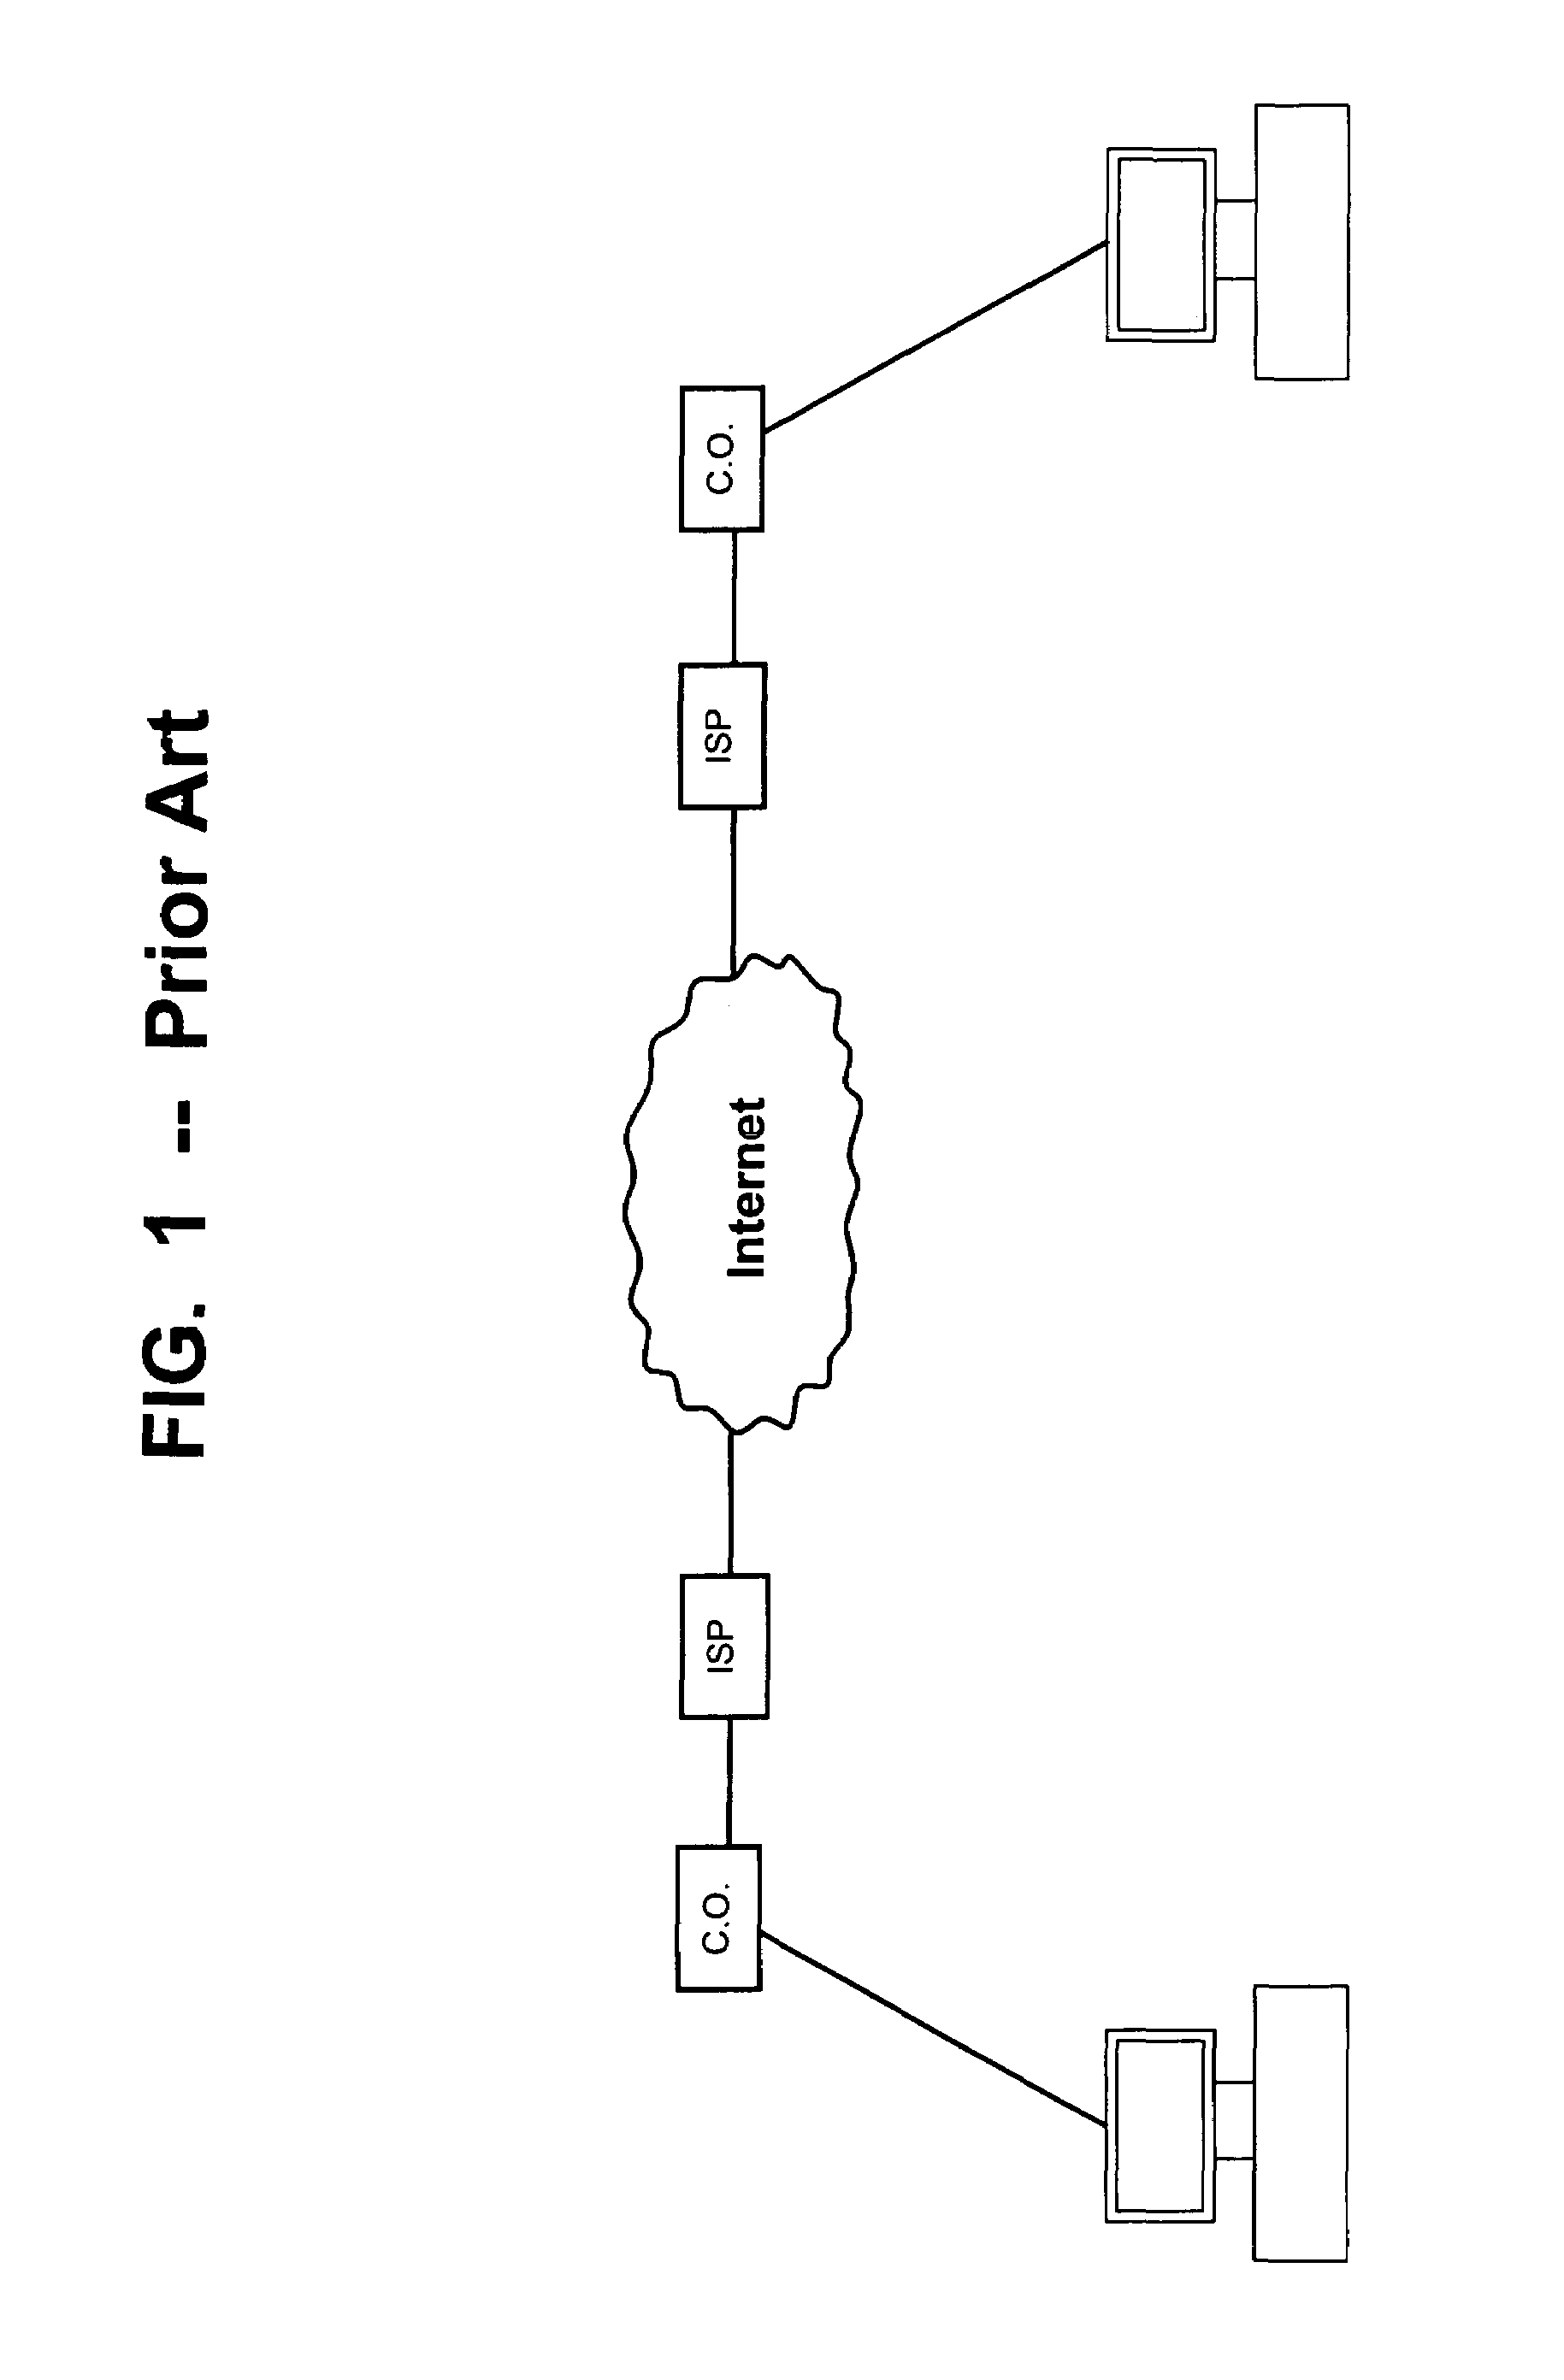 Method and system for providing voice communication over data networks